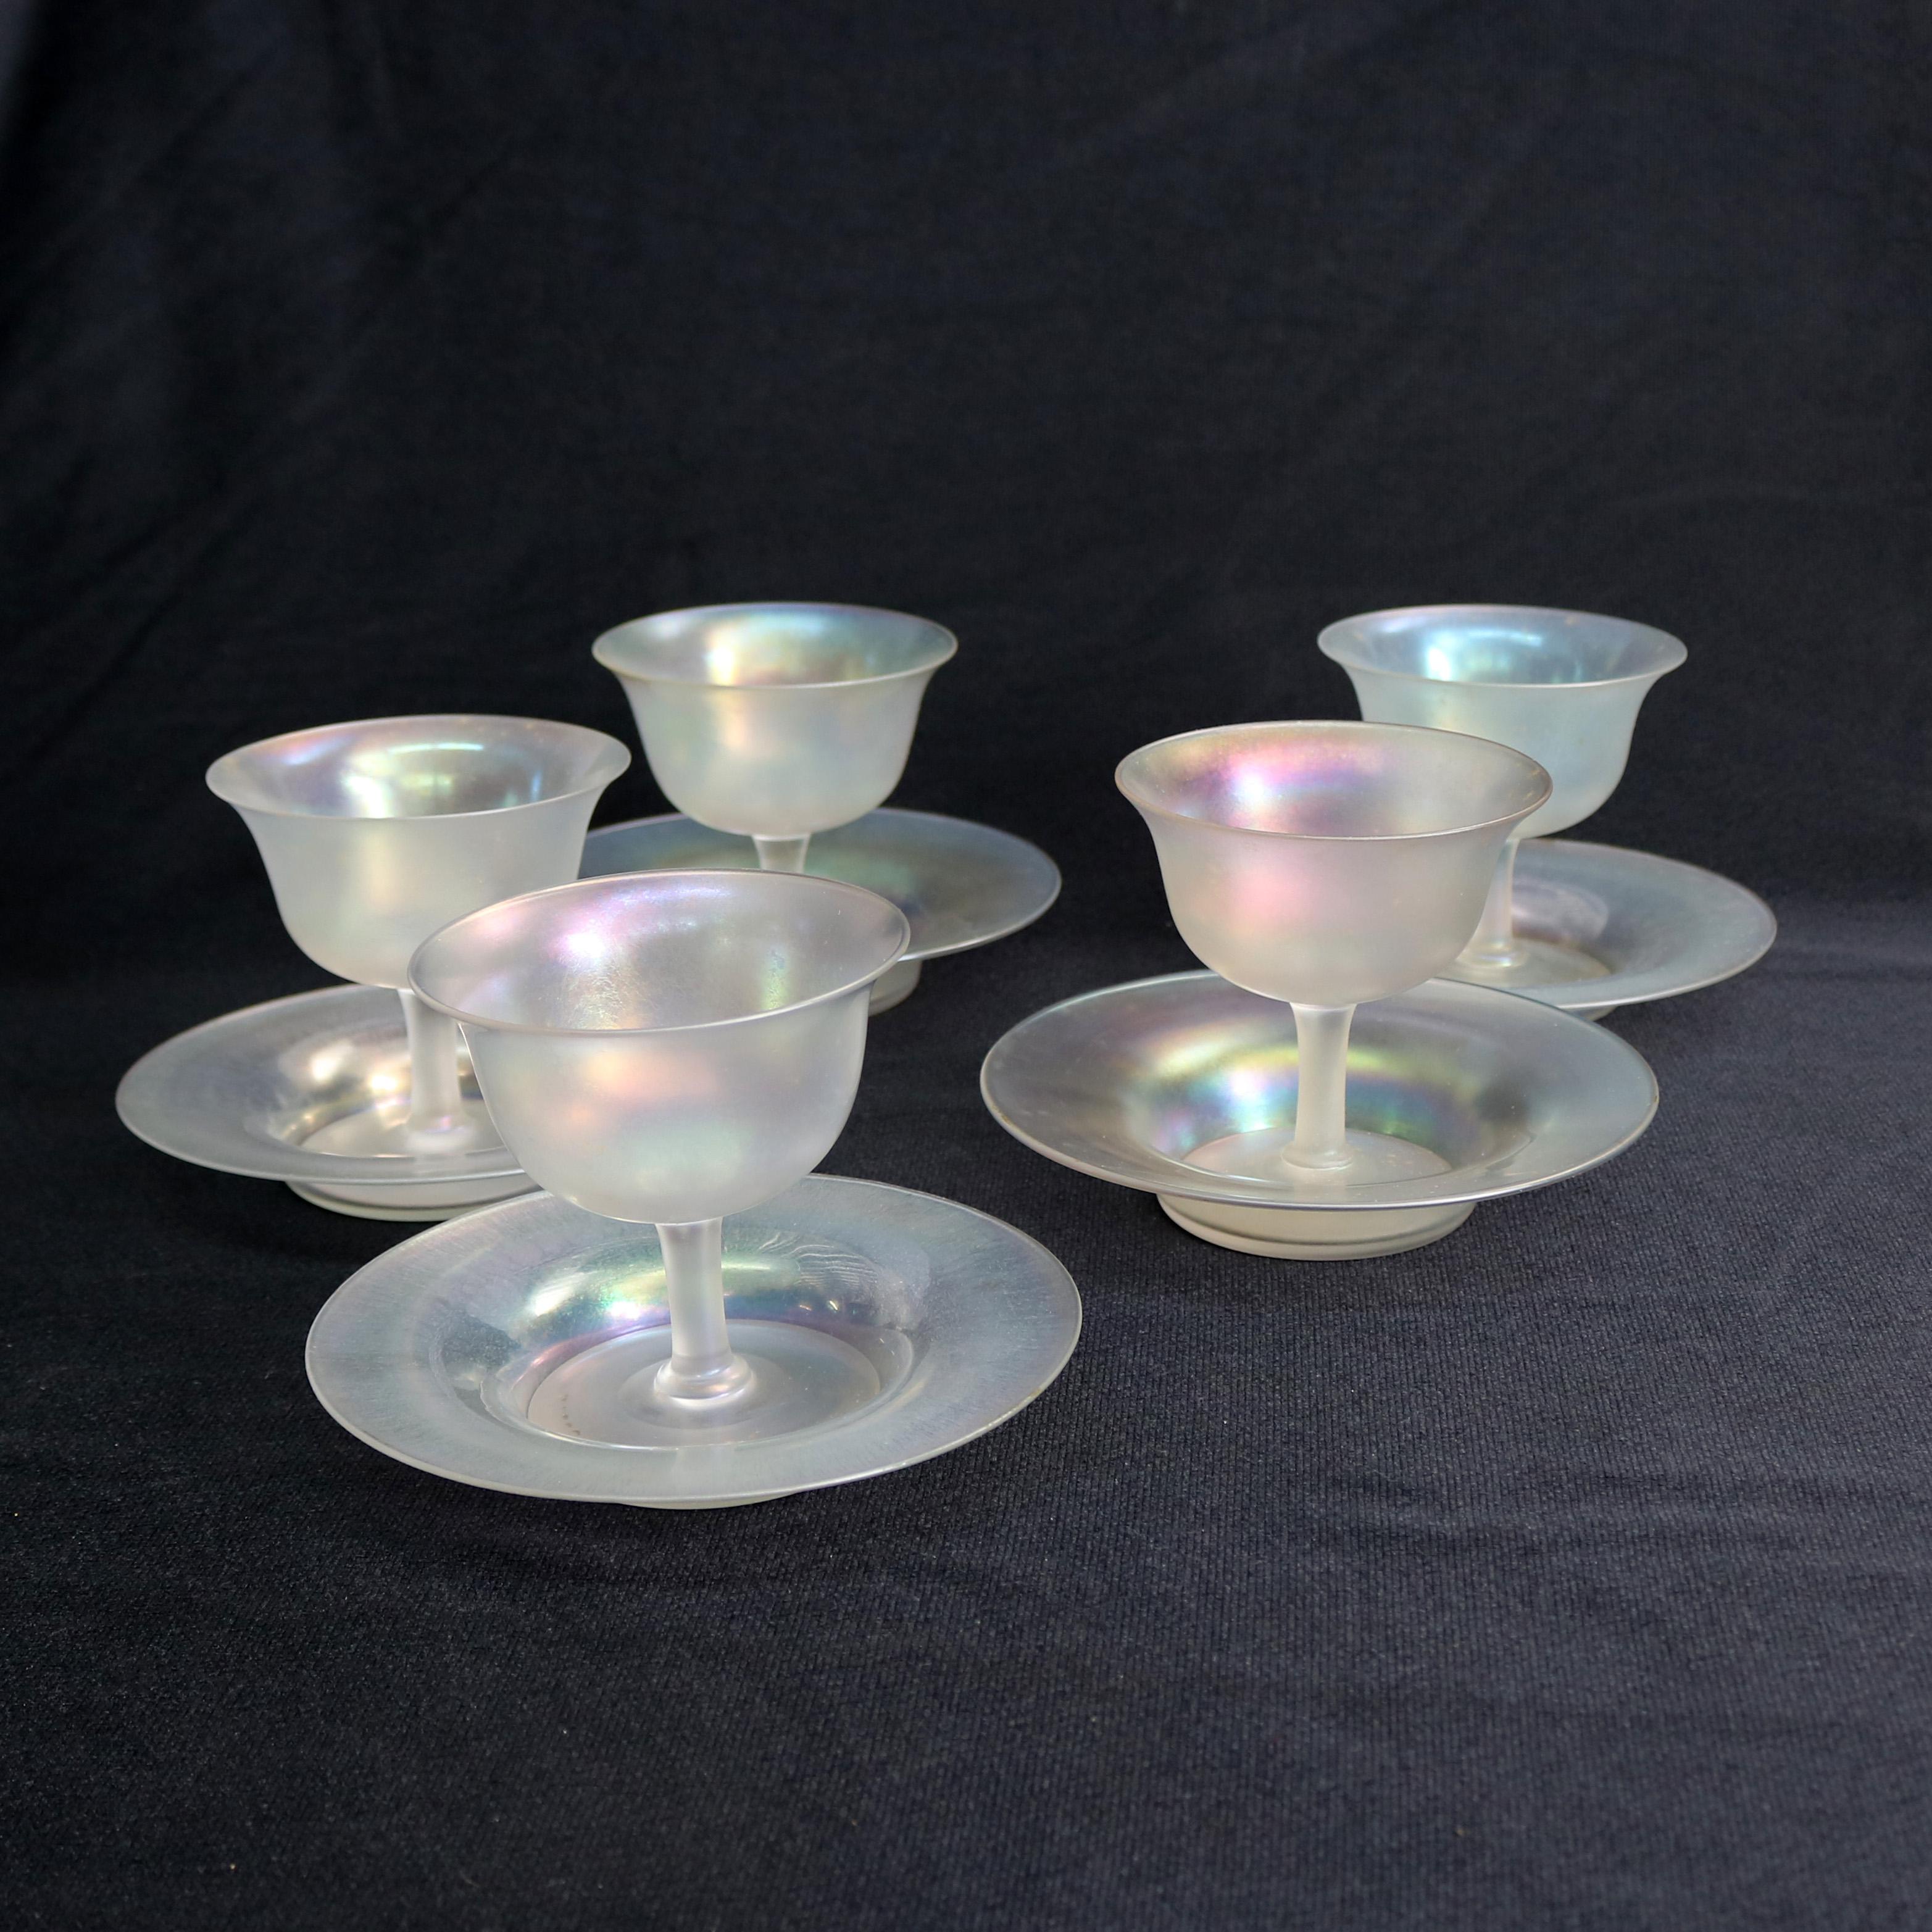 Five sets of sherbet stemmed goblets with saucers by Steuben offers iridized art glass construction, includes one extra saucer, circa 1930

Measures: 3.75